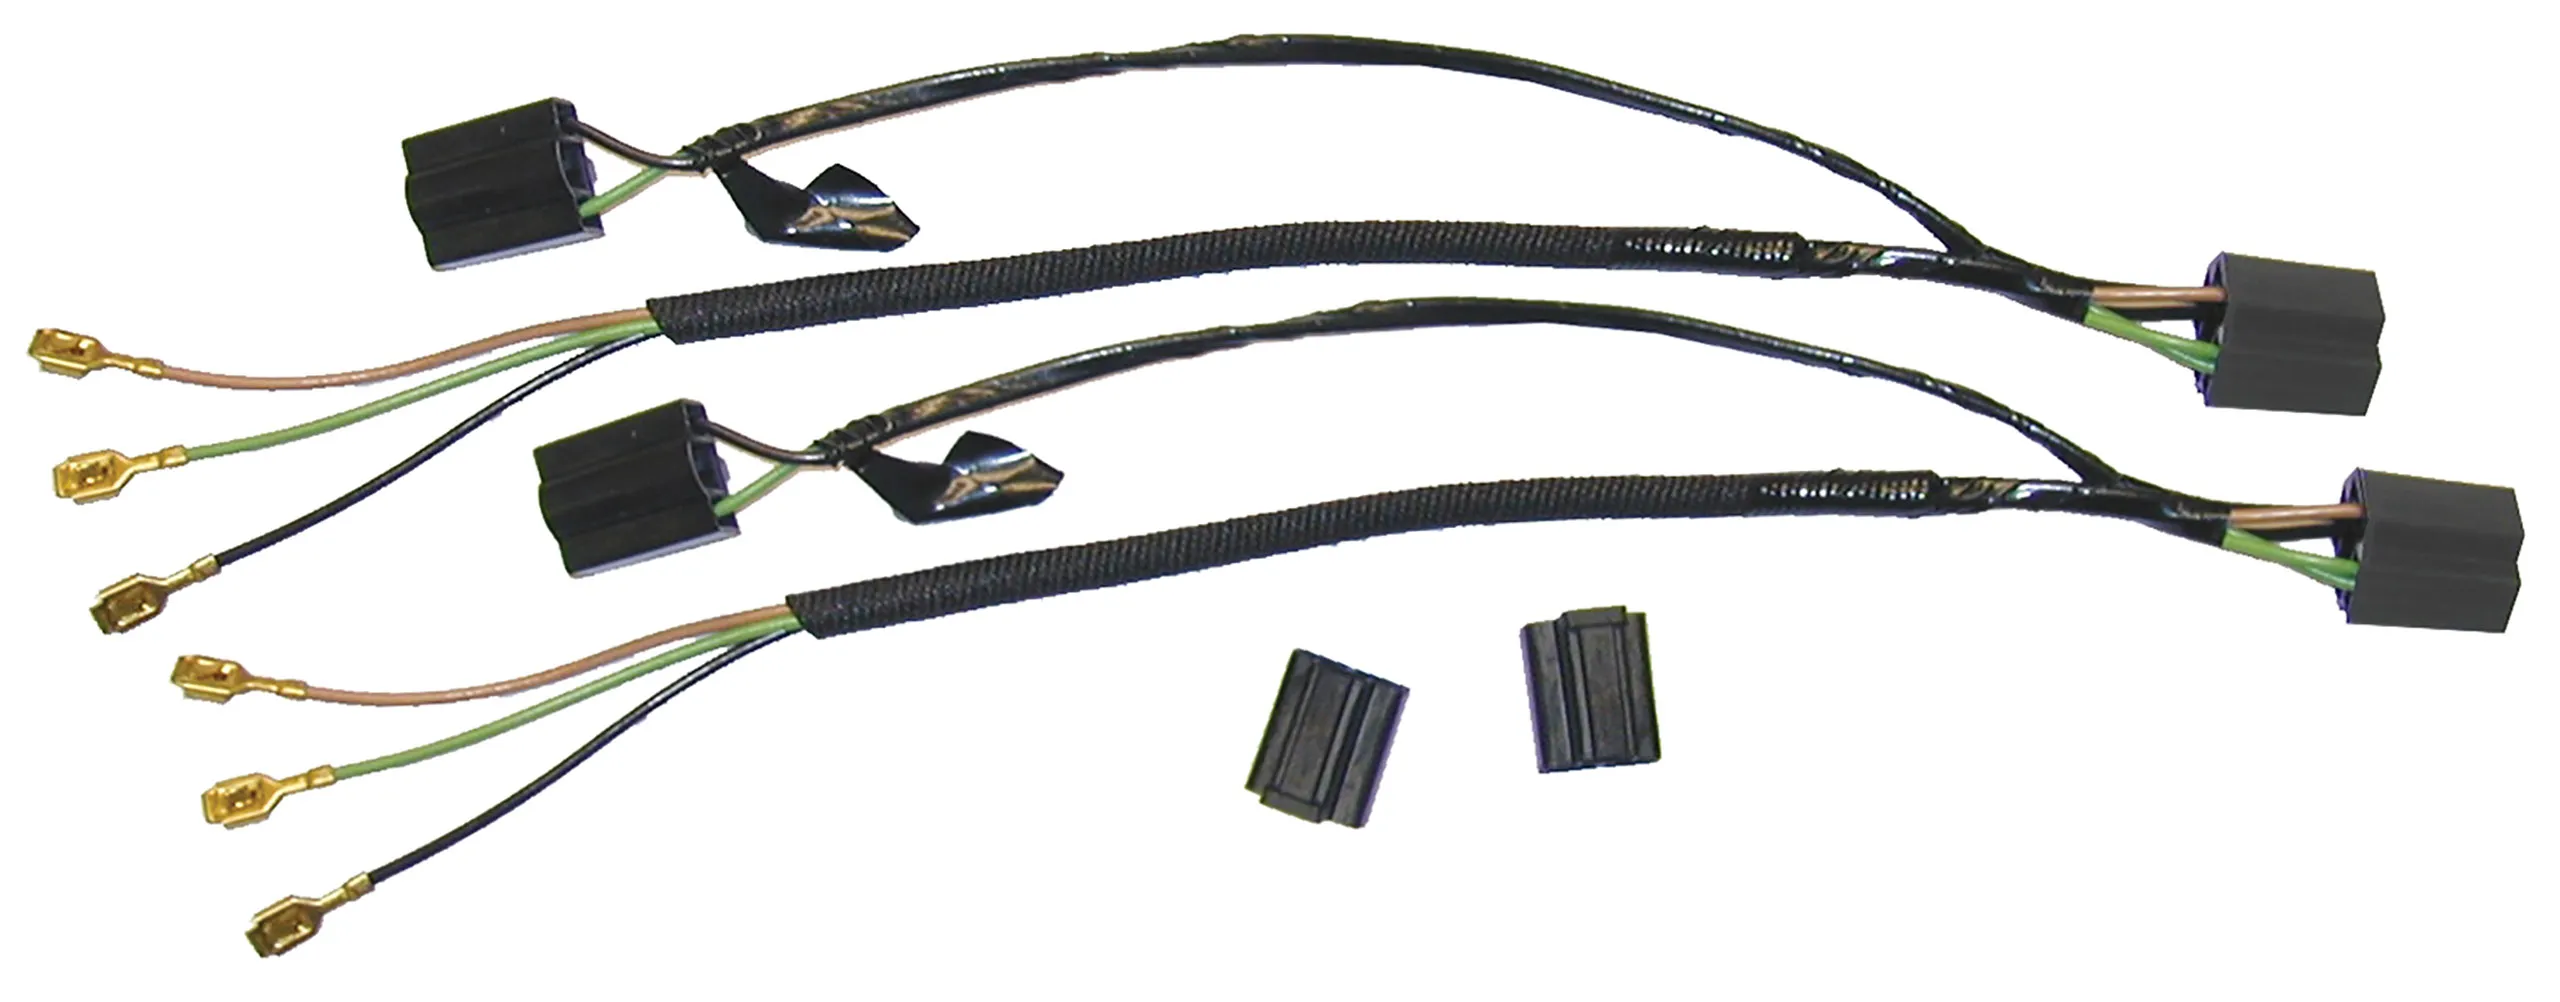 Lectric Limited, Inc. 1963-1967 Chevrolet Corvette Harness. Headlight Bucket Extensions 2 Piece